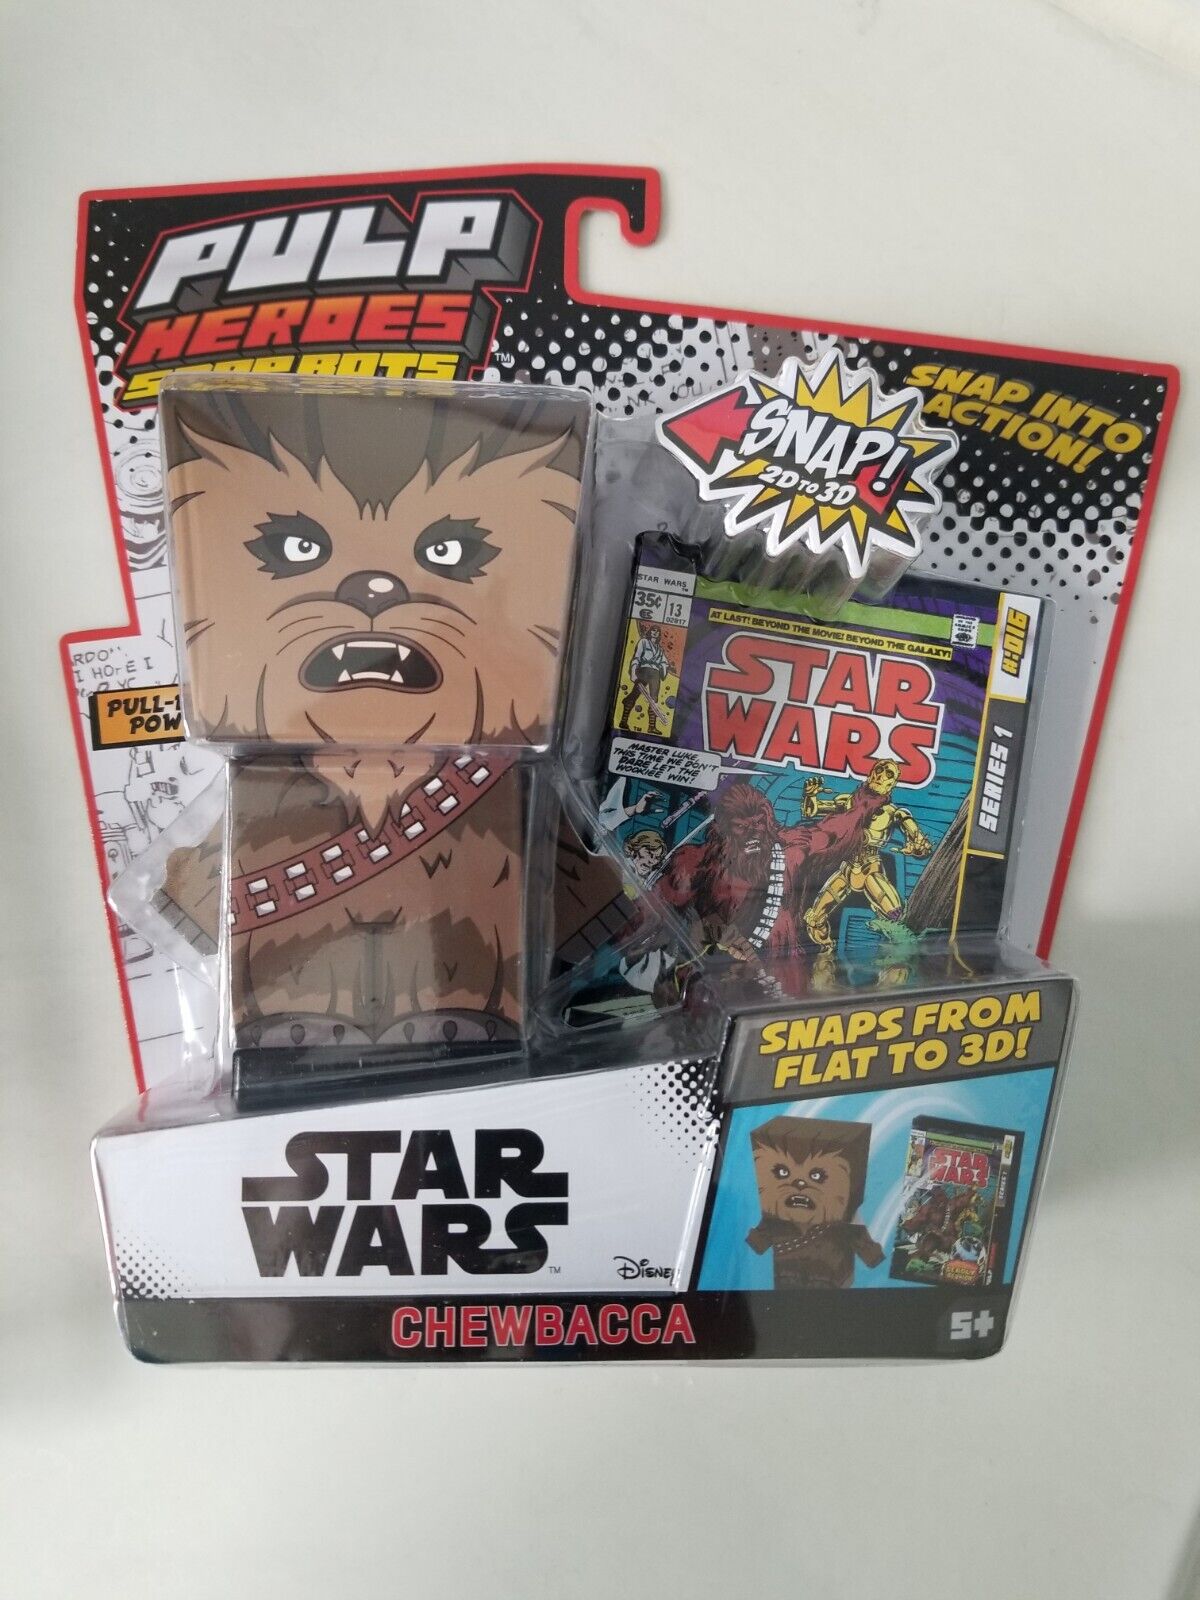 Star Wars Chewbacca Pulp Heroes Snap Bots Series 1 - 2D to 3D Far Out Toys Inc